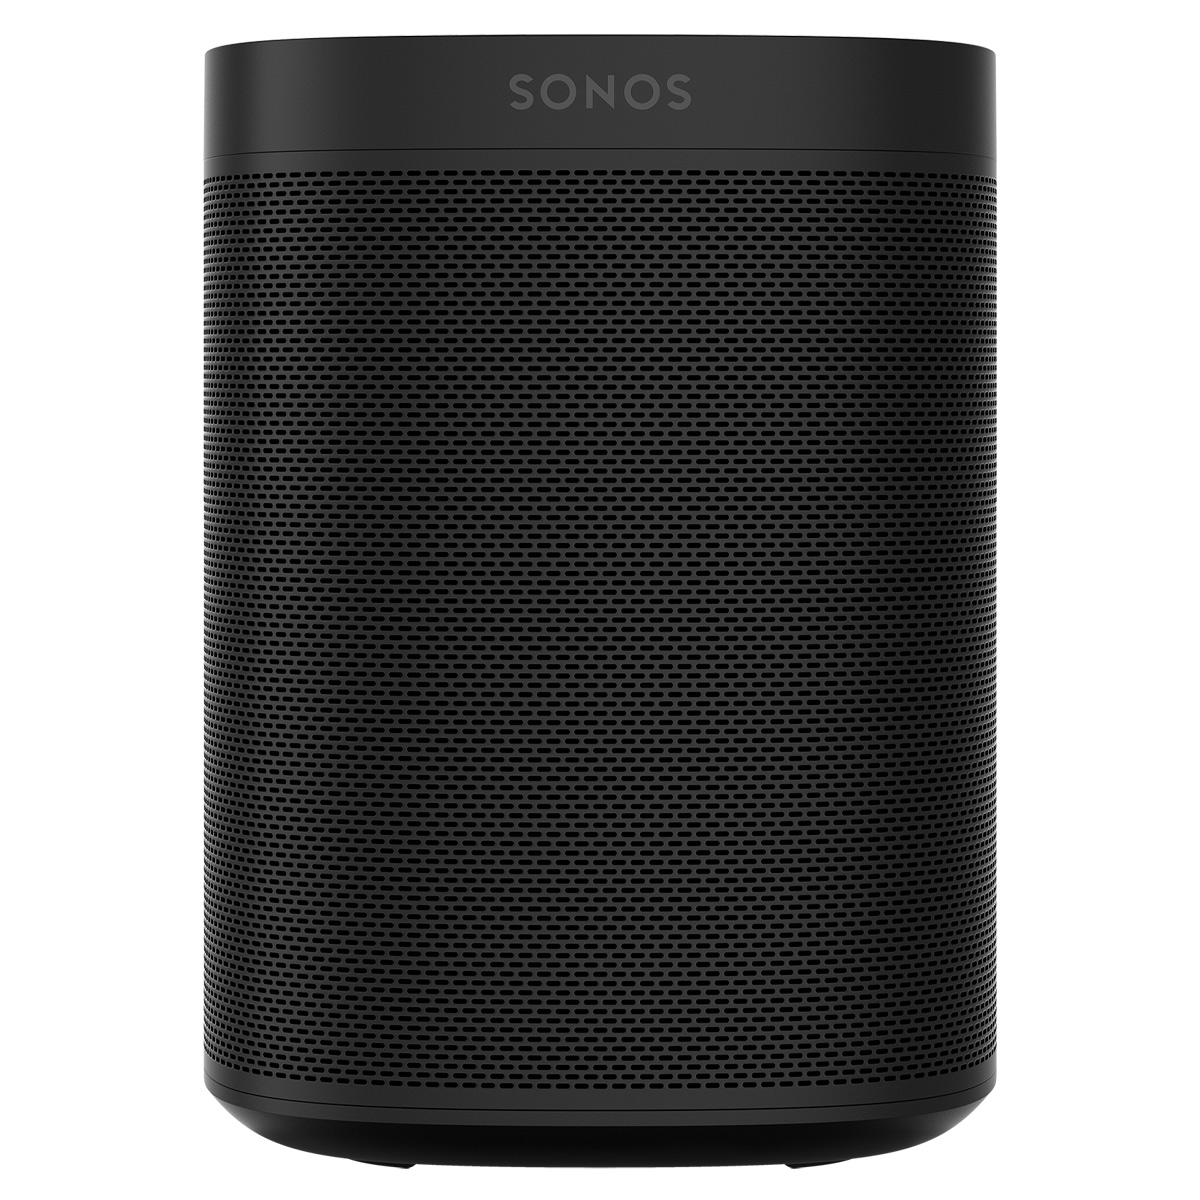 Sonos Two Room Set with Sonos One Gen 2 - Smart Speaker with Voice Control Built-In(Black) - image 2 of 4